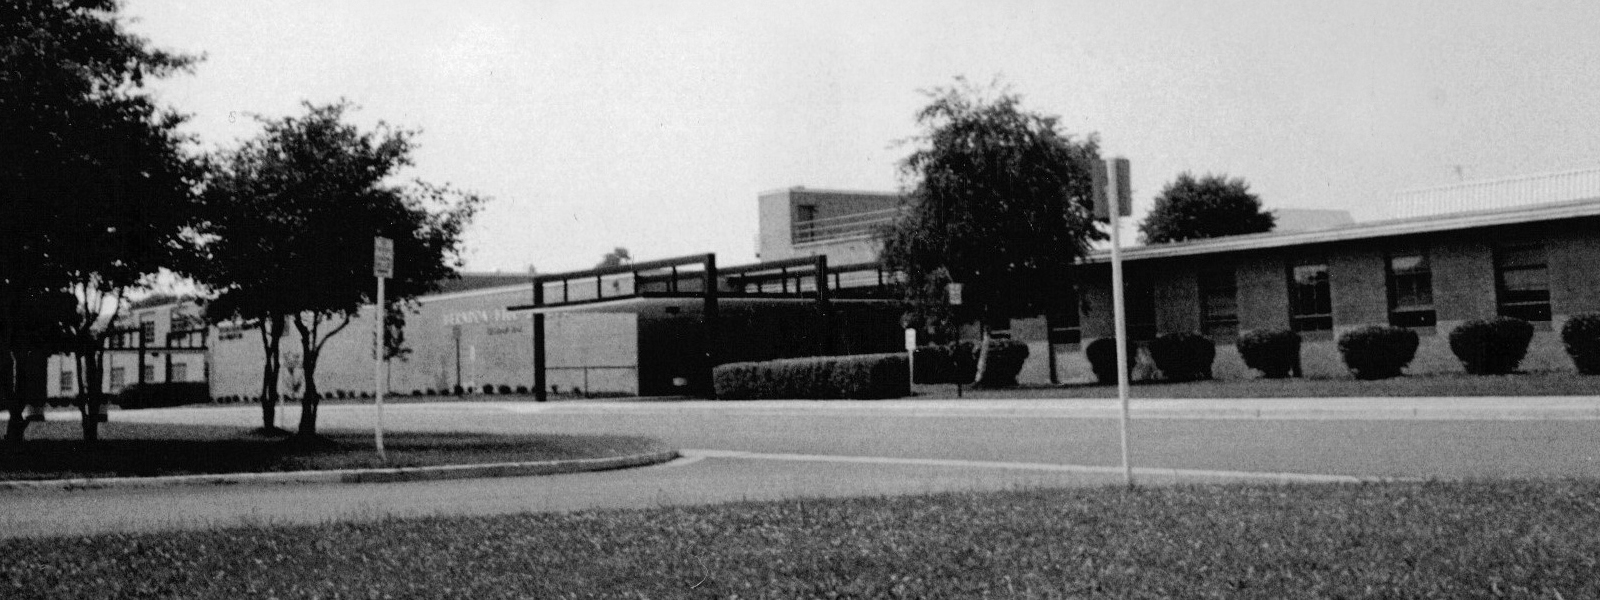 Black and white photograph of the front of Herndon High School’s 1967 building. The date the photograph was taken is unknown.